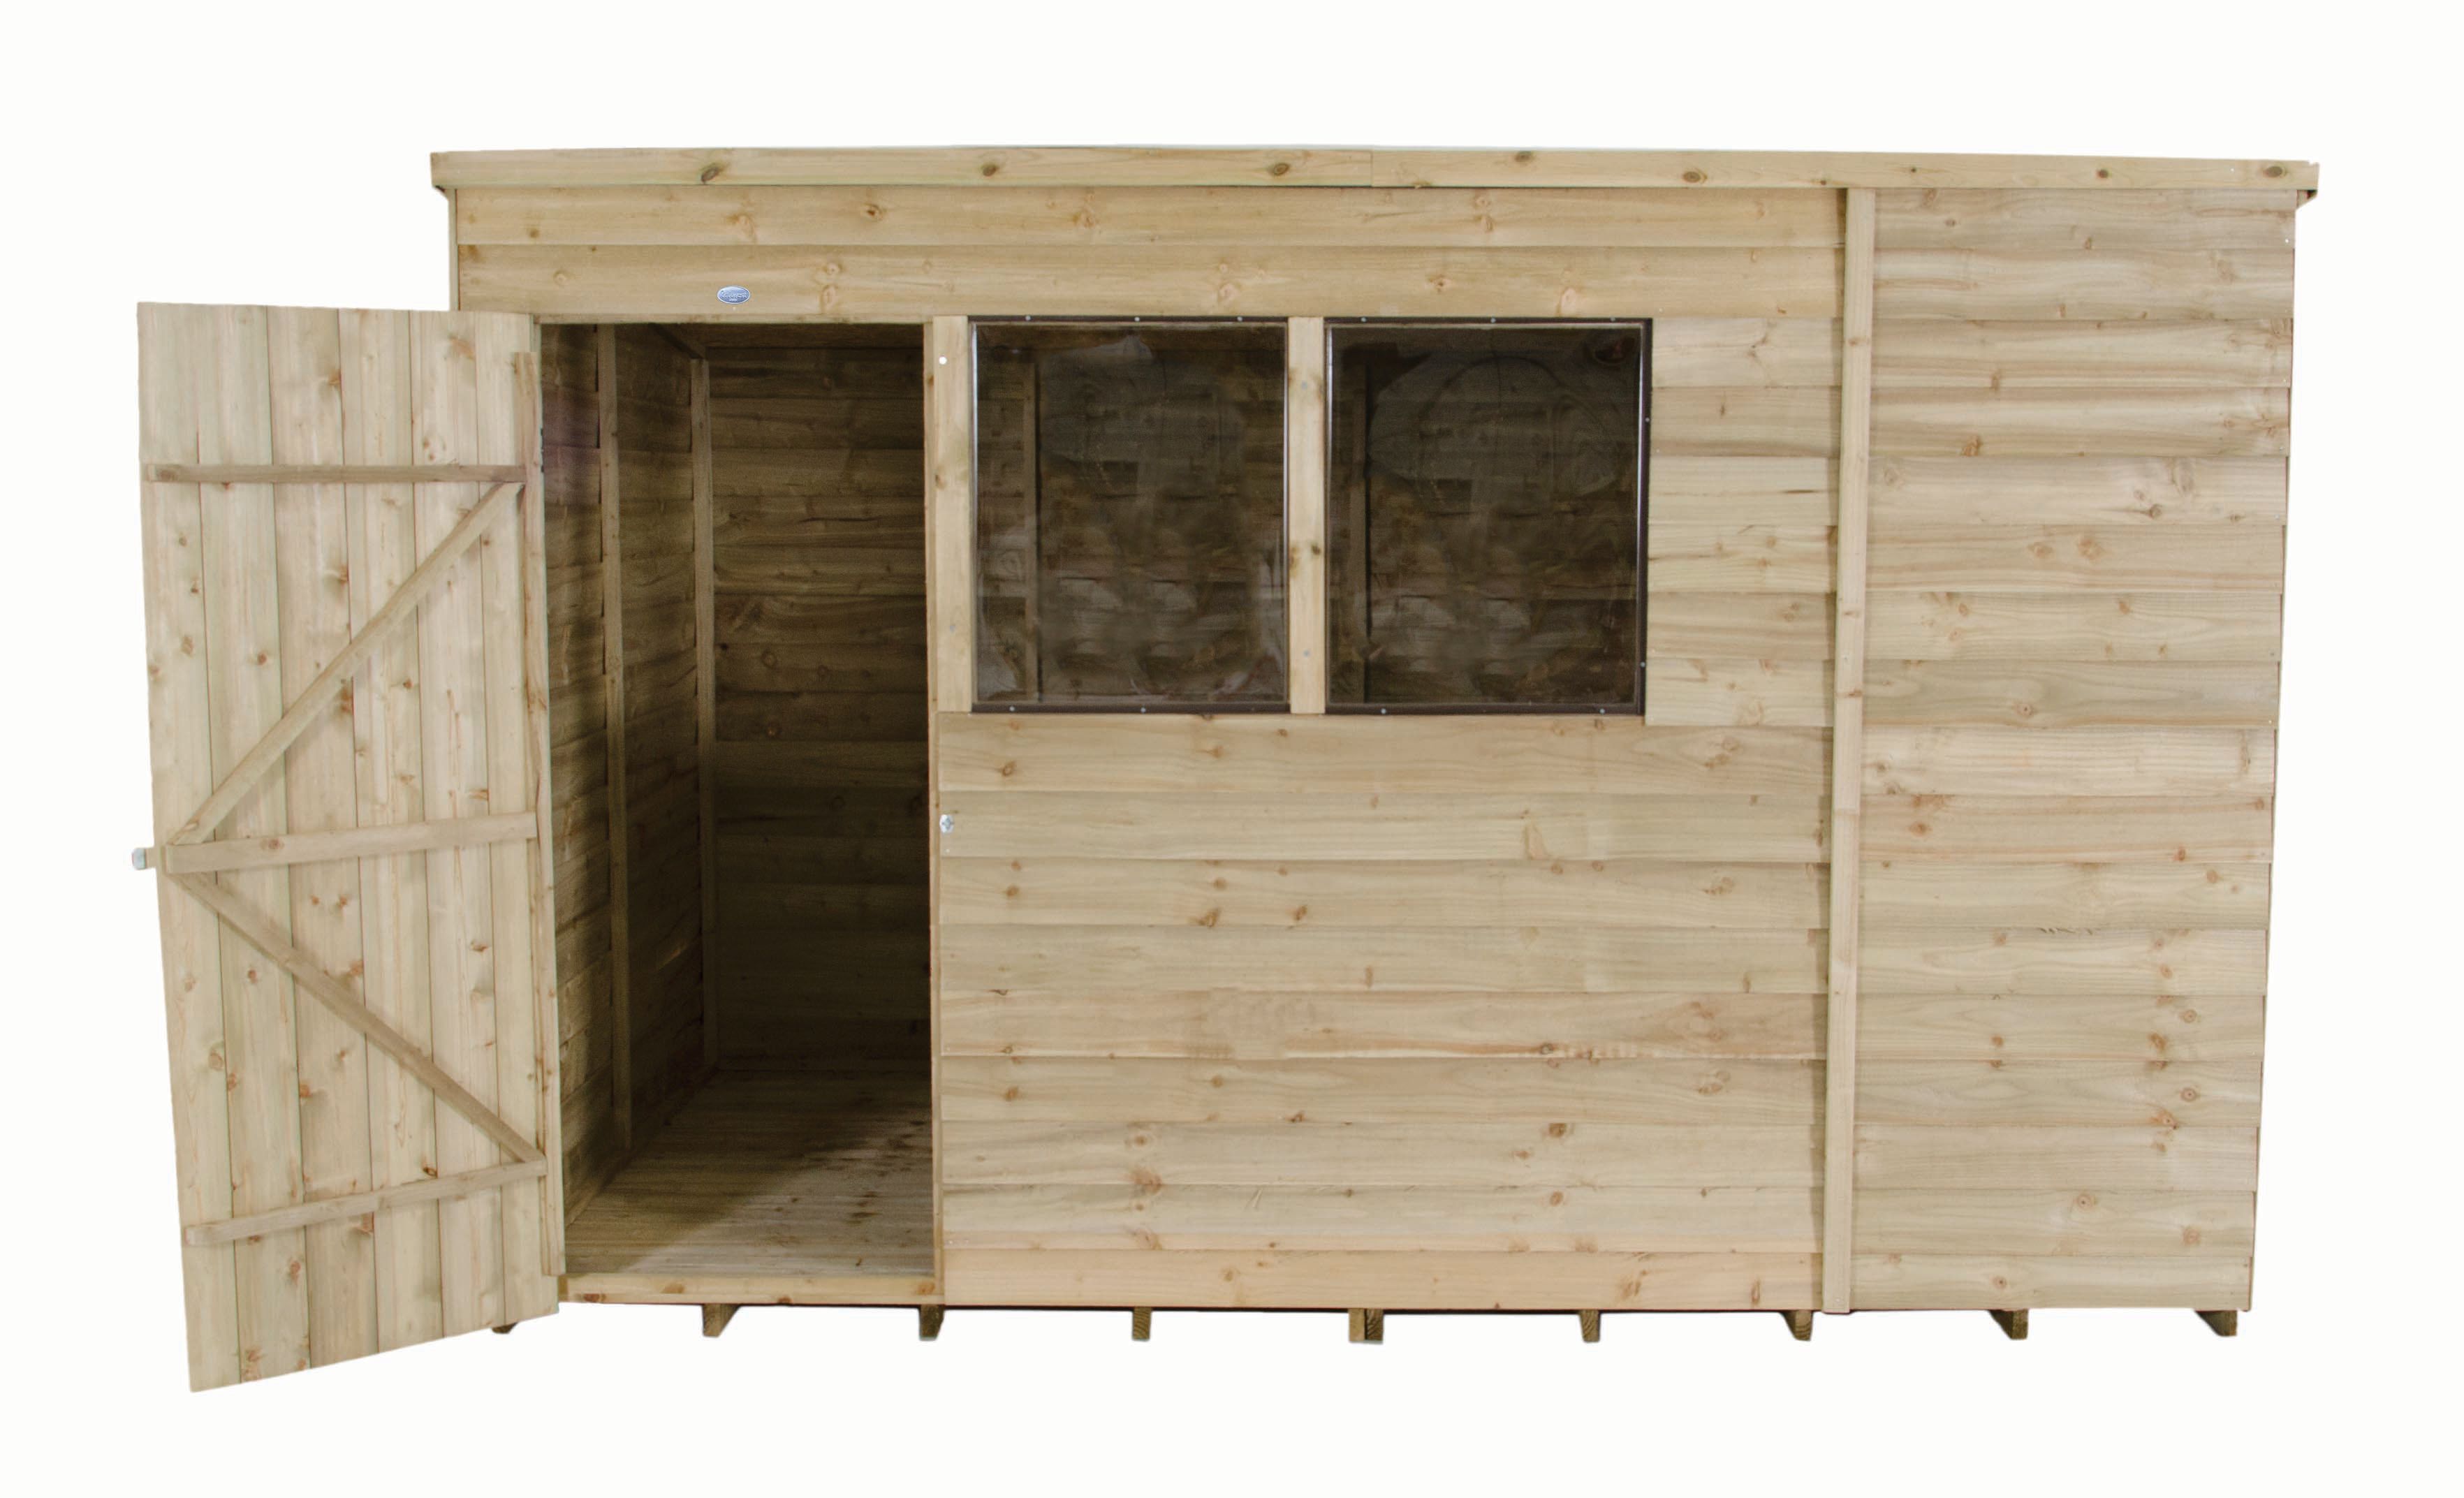 Forest Garden 10 x 6 ft Pent Overlap Pressure Treated Shed